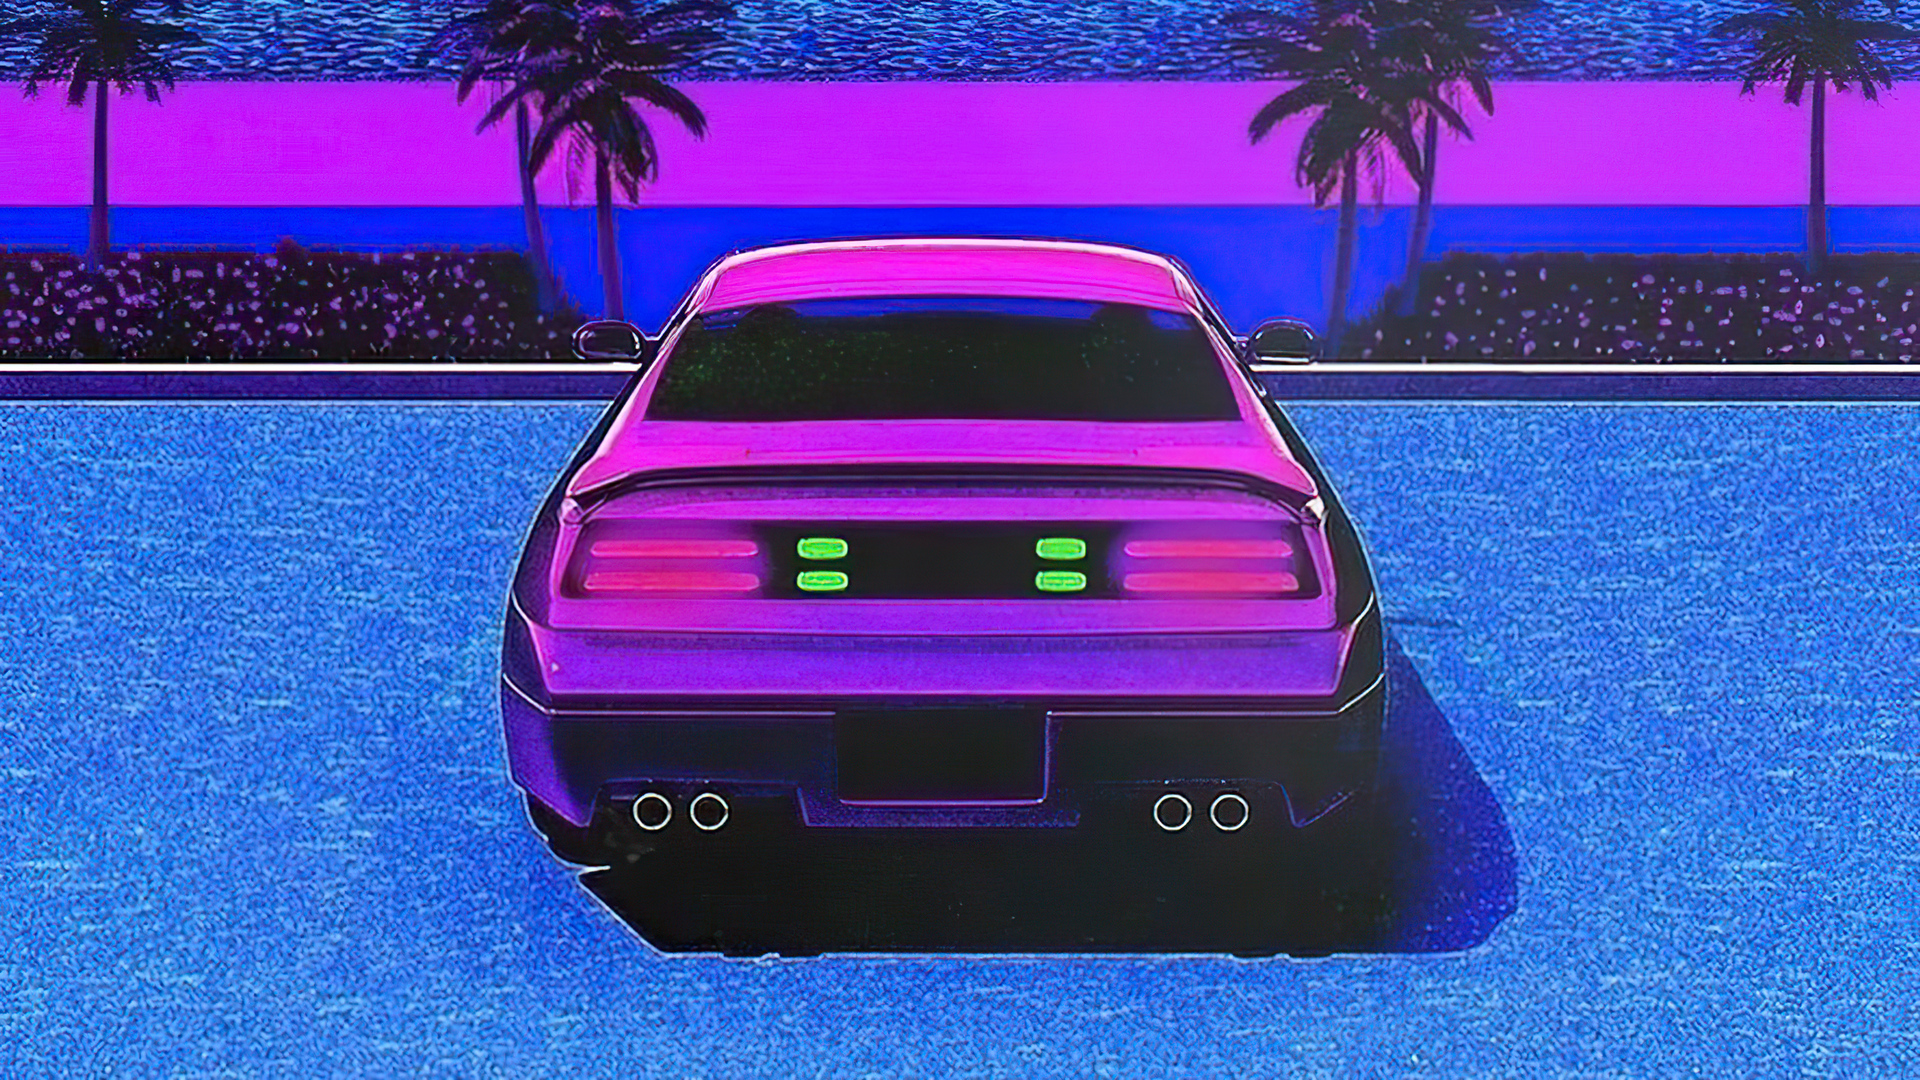 X vaporwave retro car at beach k laptop full hd p hd k wallpapers images backgrounds photos and pictures